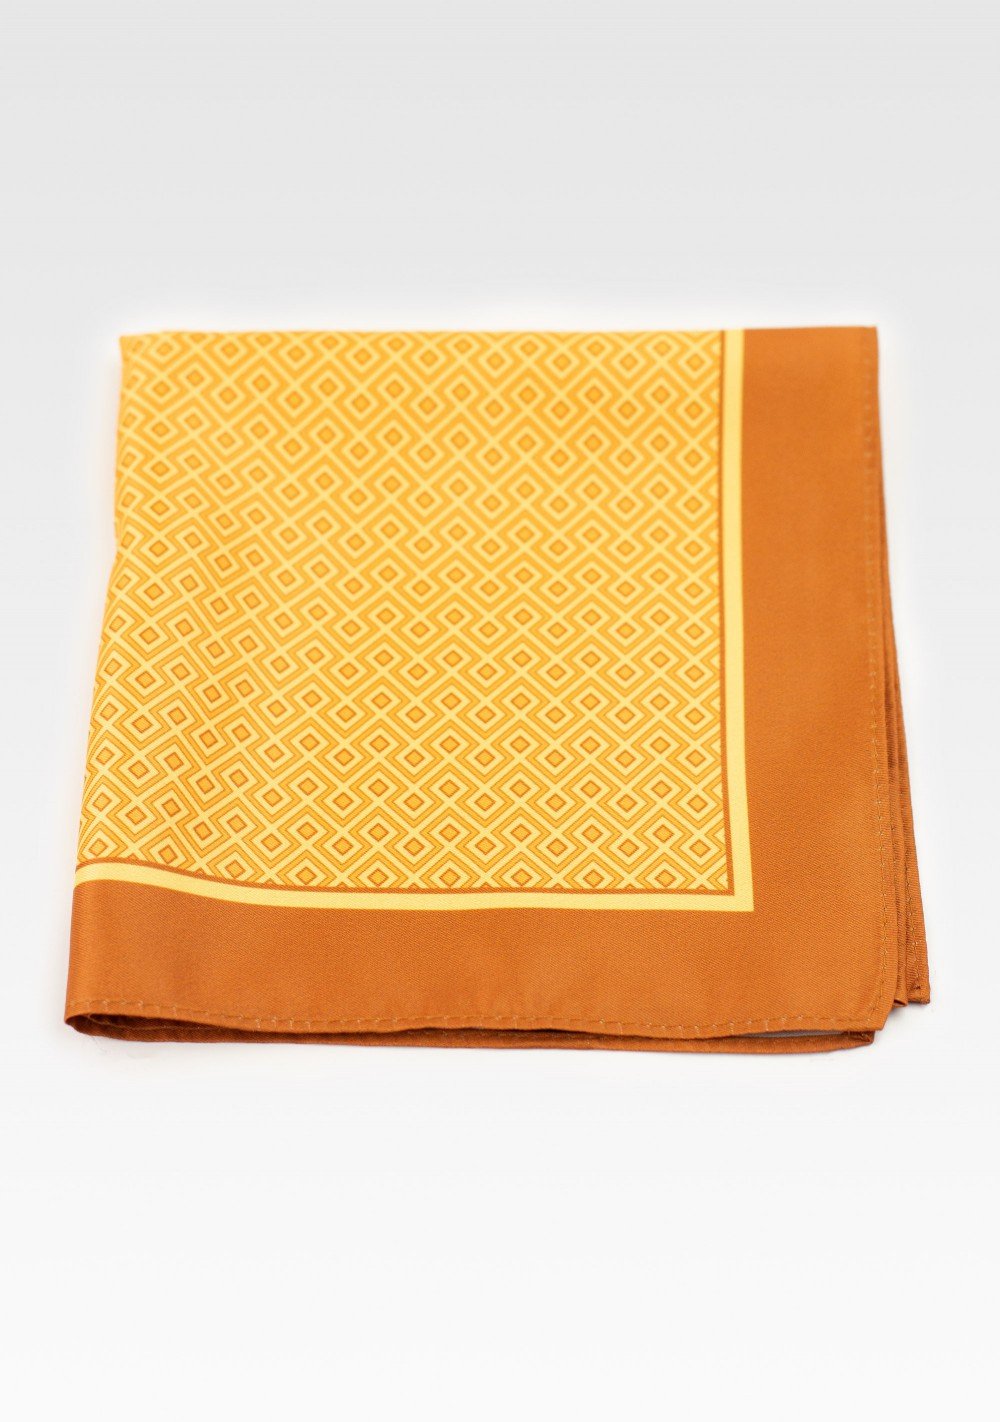 Geometric Print Suit Pocket Square in Gold and Yellow